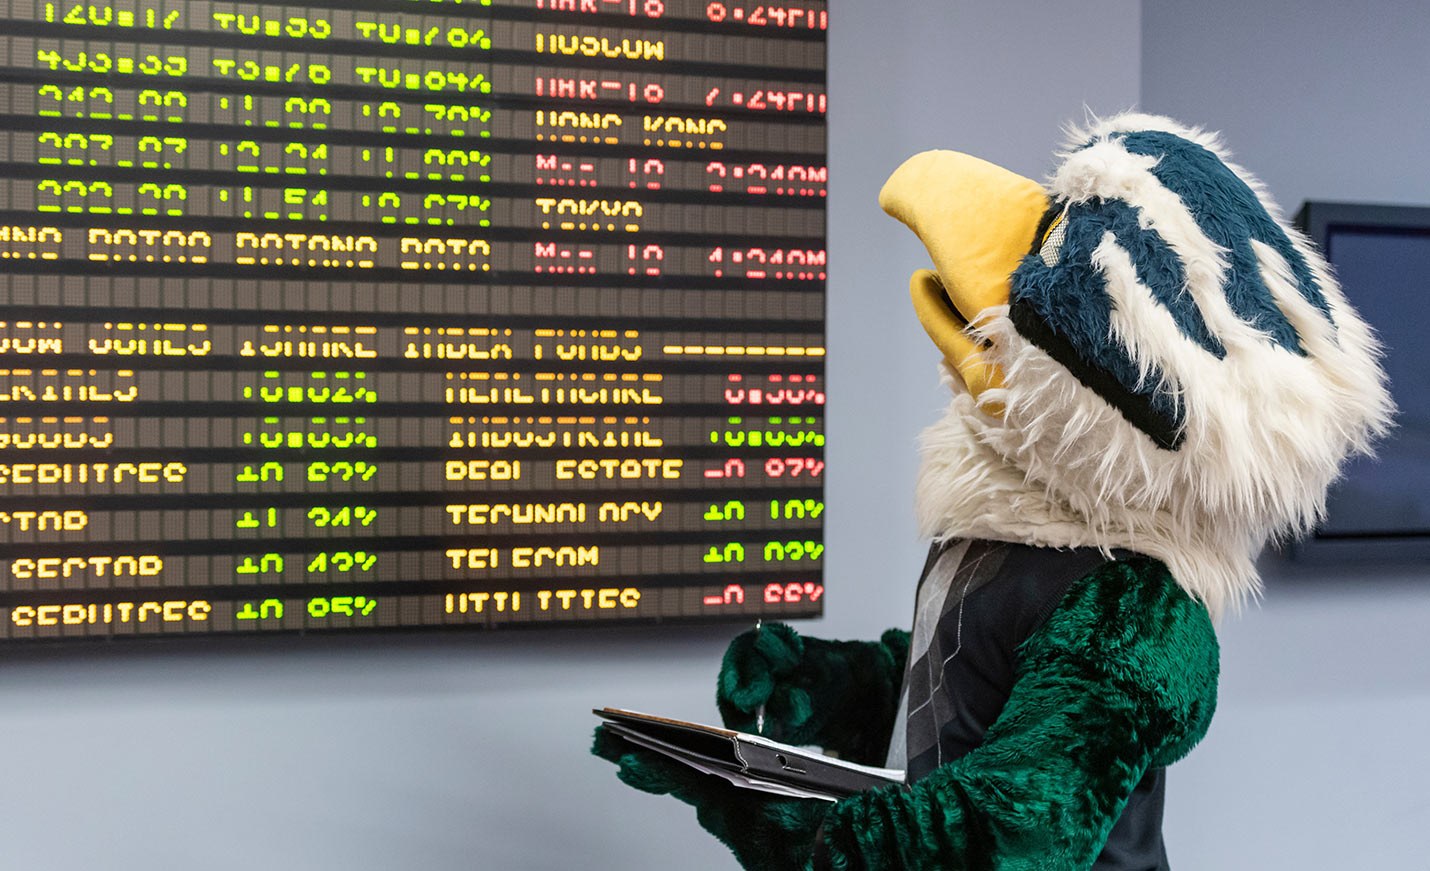 Sammy C. Hawk stands taking notes while looking at a stock ticker board